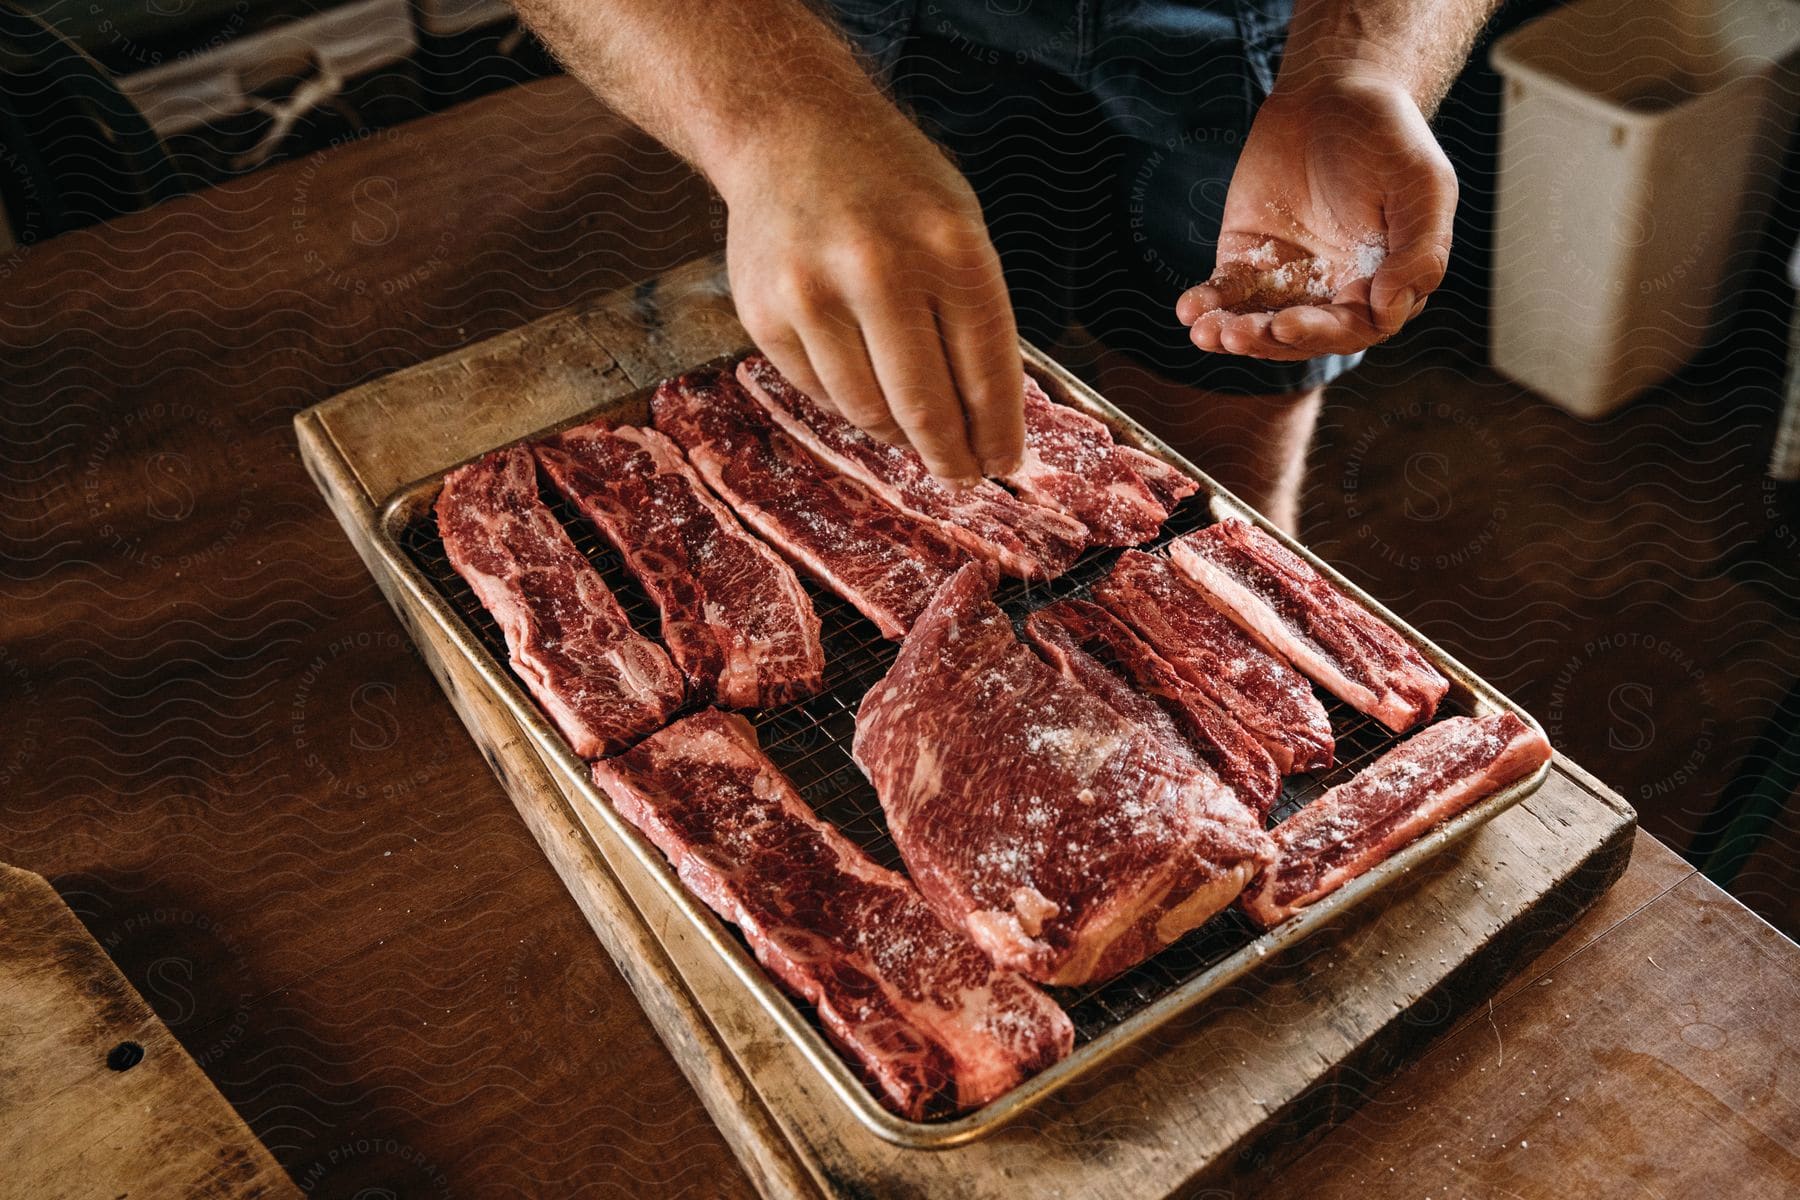 Stock photo of a man salts a tray of short ribs in a kitchen